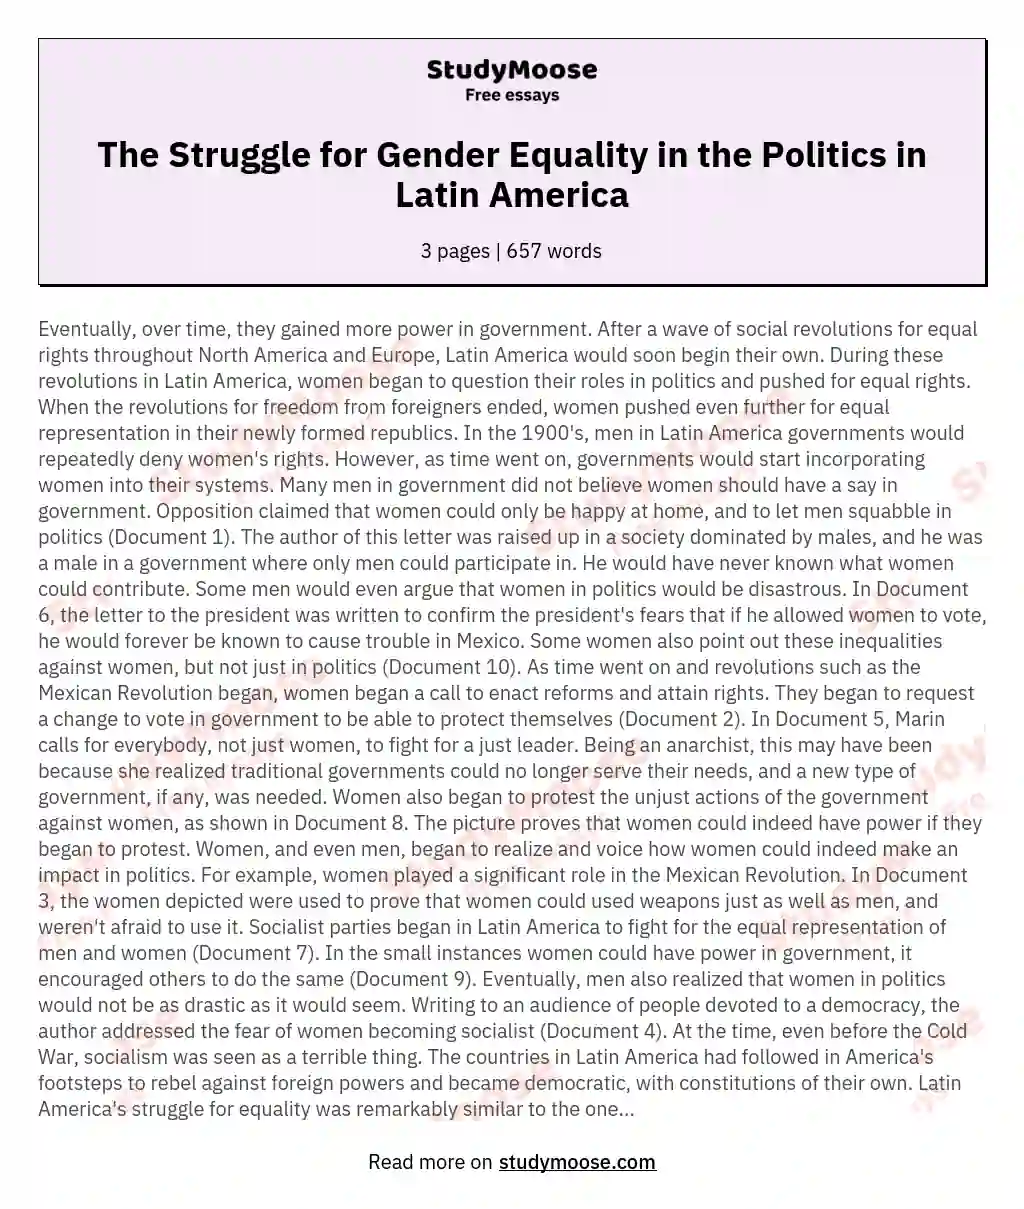 The Struggle for Gender Equality in the Politics in Latin America essay